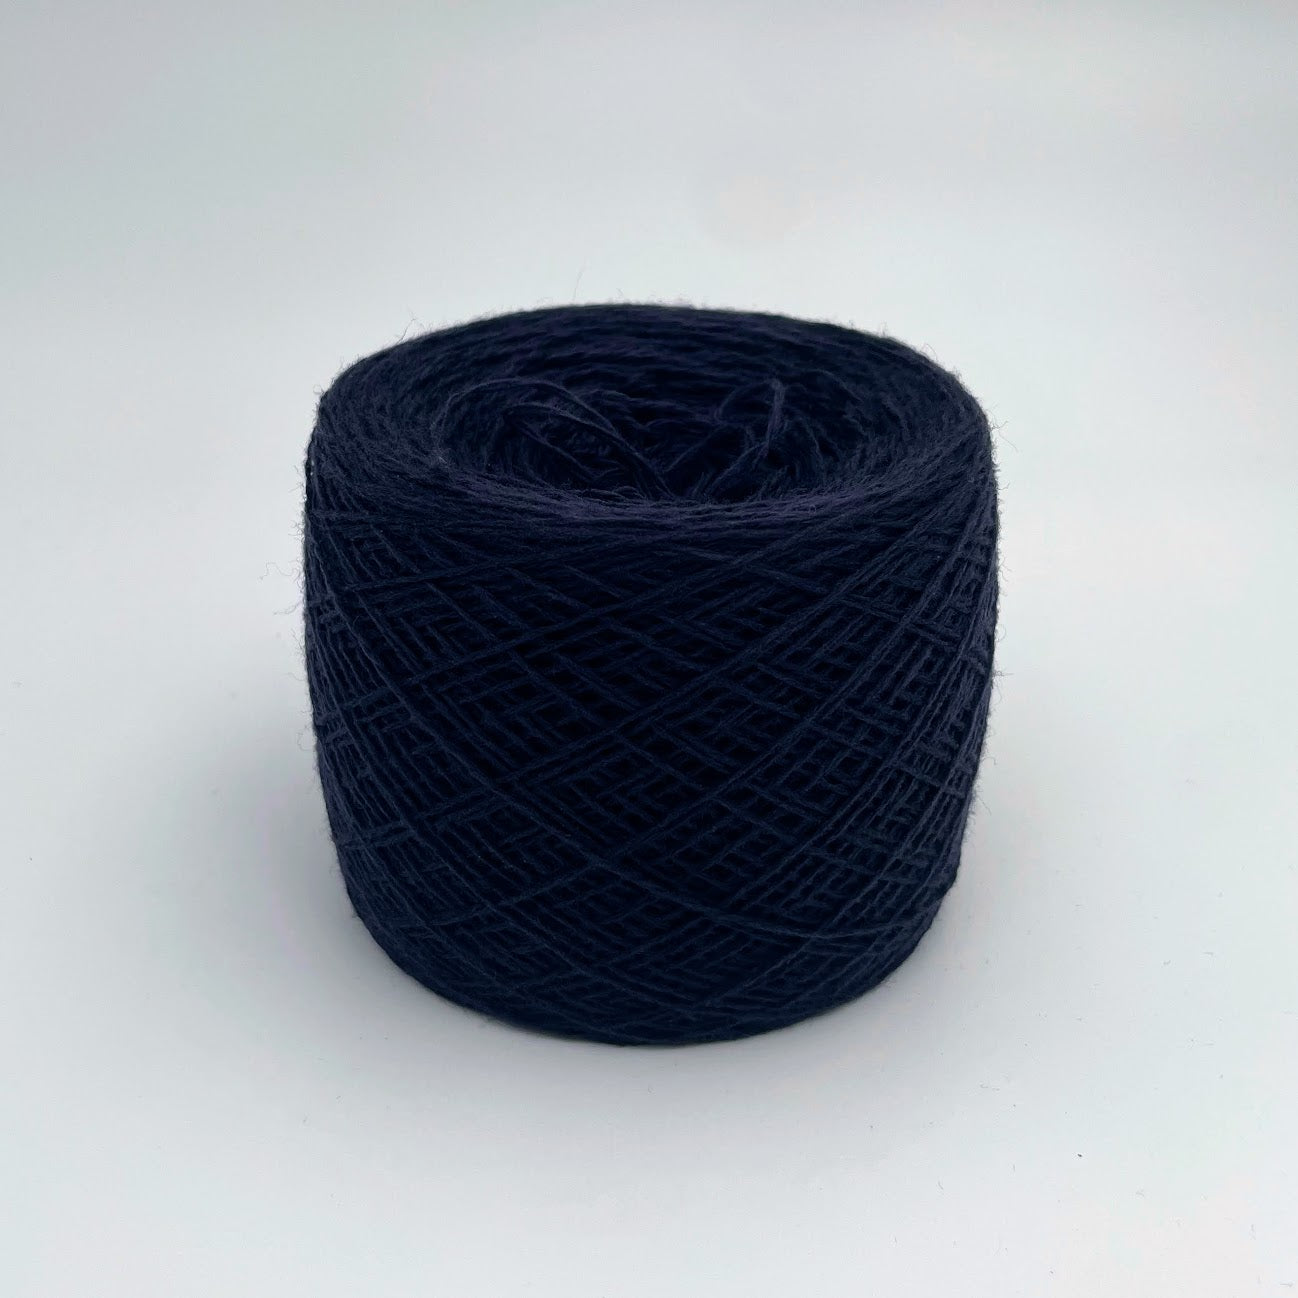 100% Cashmere Yarn - Deadstock Yarn - Made in Italy - Blue - Lace Weight  - 100g